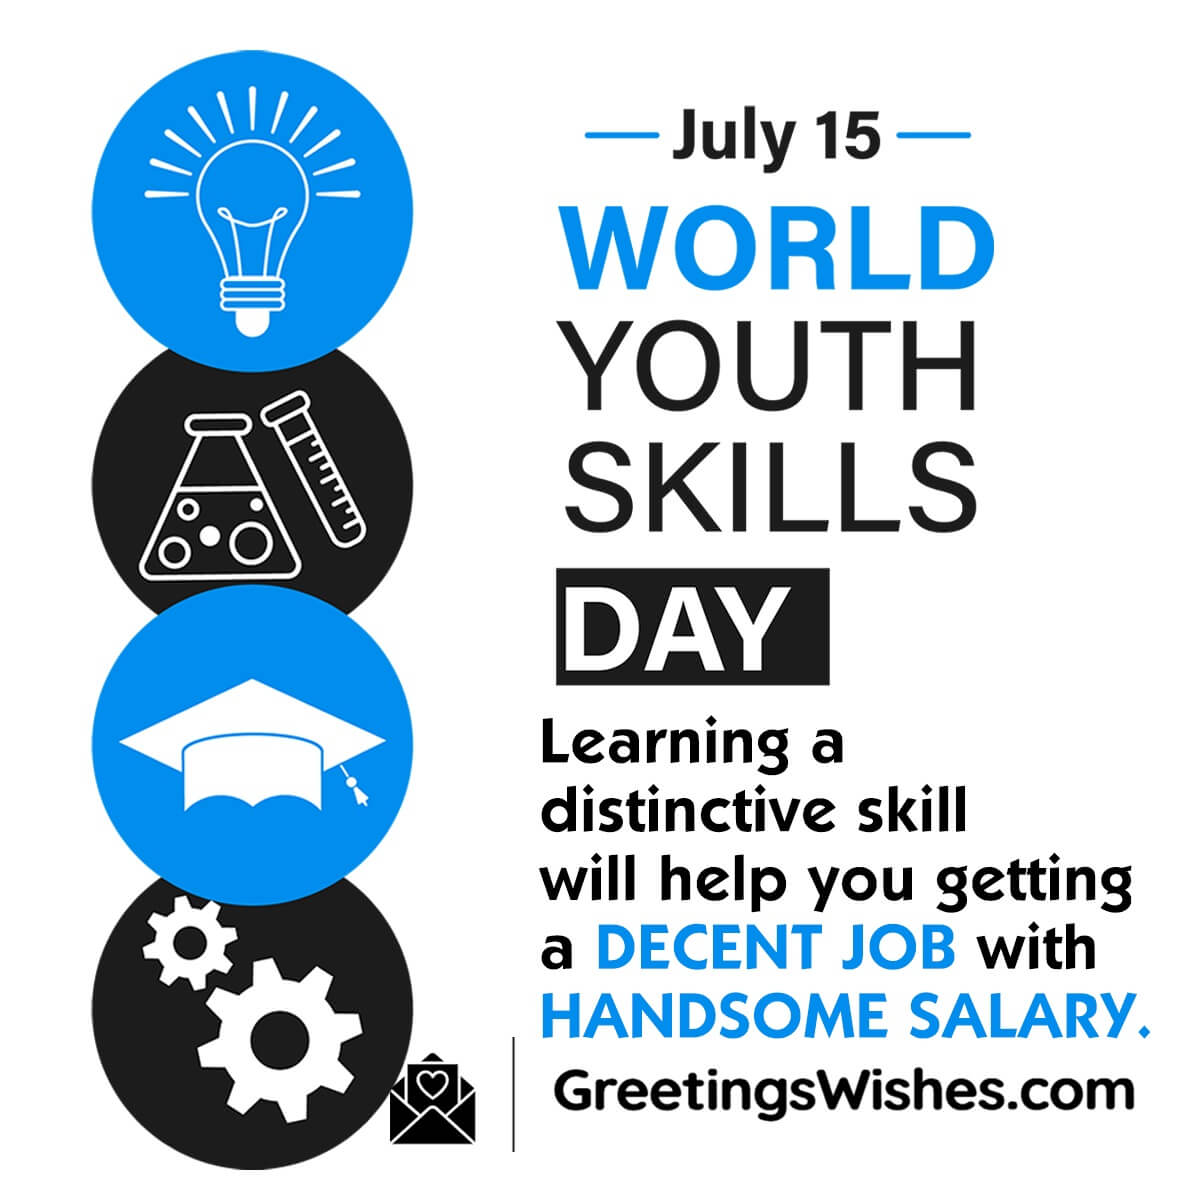 World Youth Skills Day Quotes Messages (15 JULY)